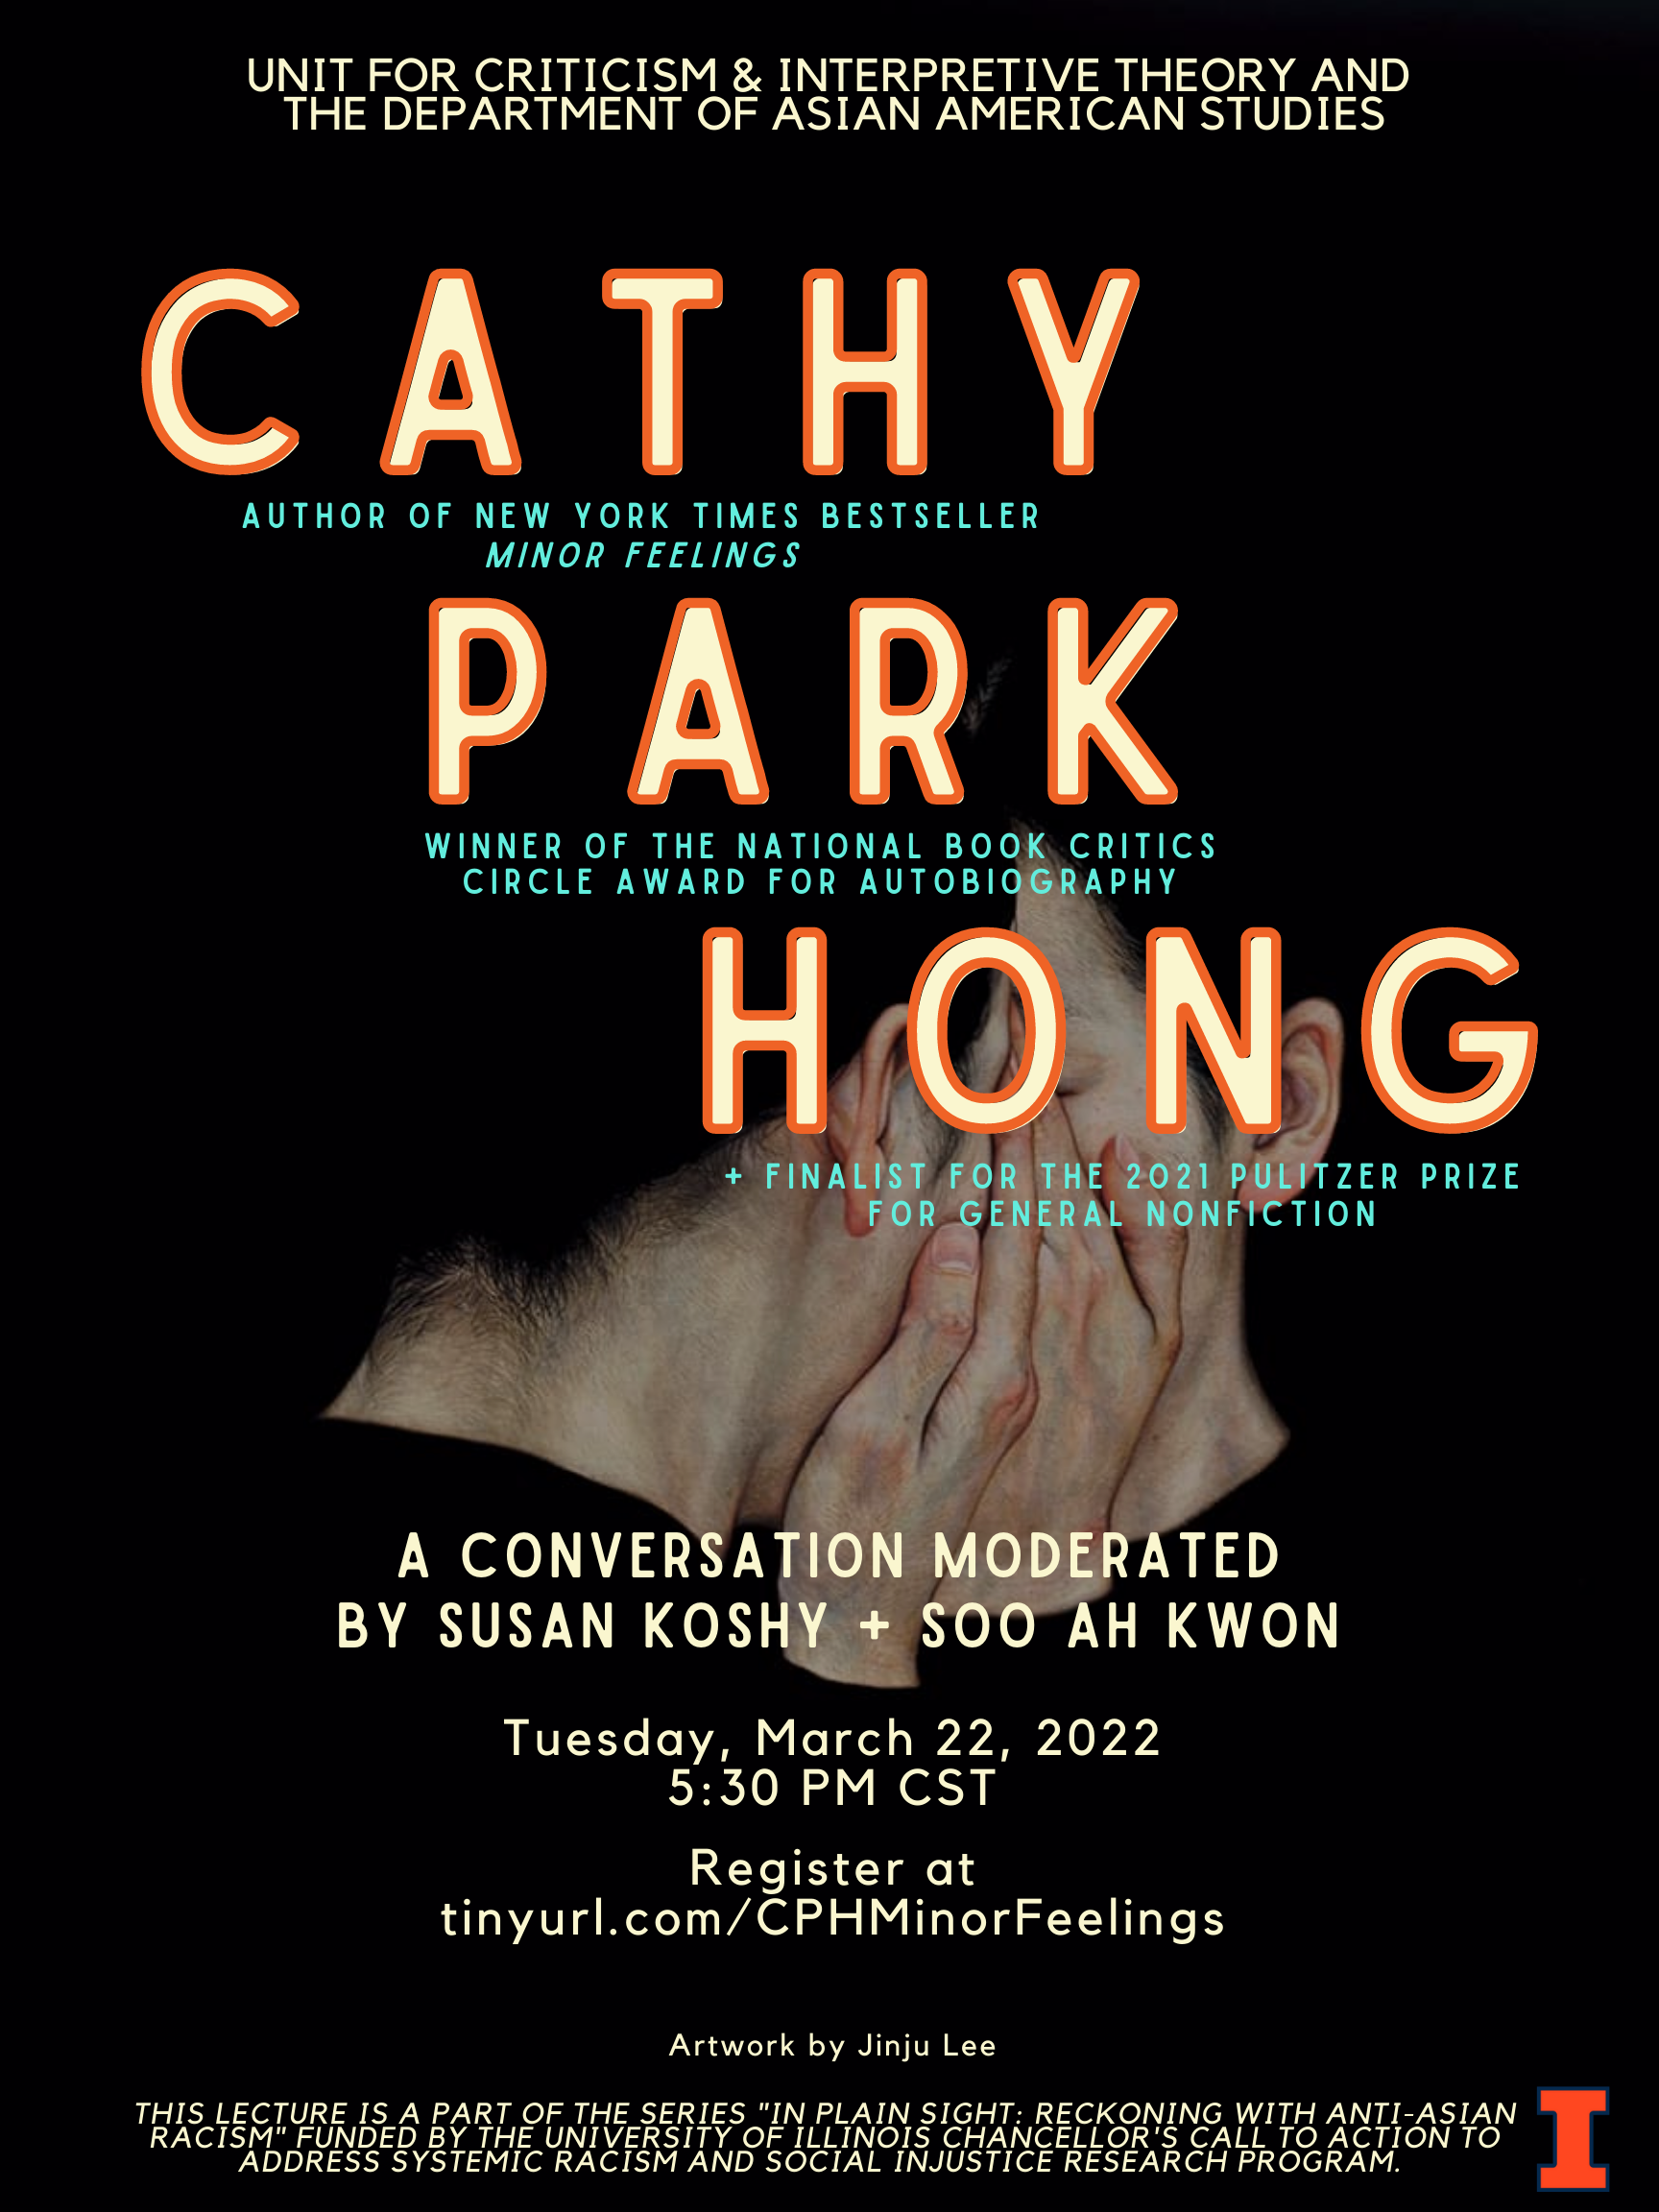 Cathy Park Hong: A conversation moderated by Susan Koshy & Soo Ah Kwon on March 22, 2022 5:30 pm CST